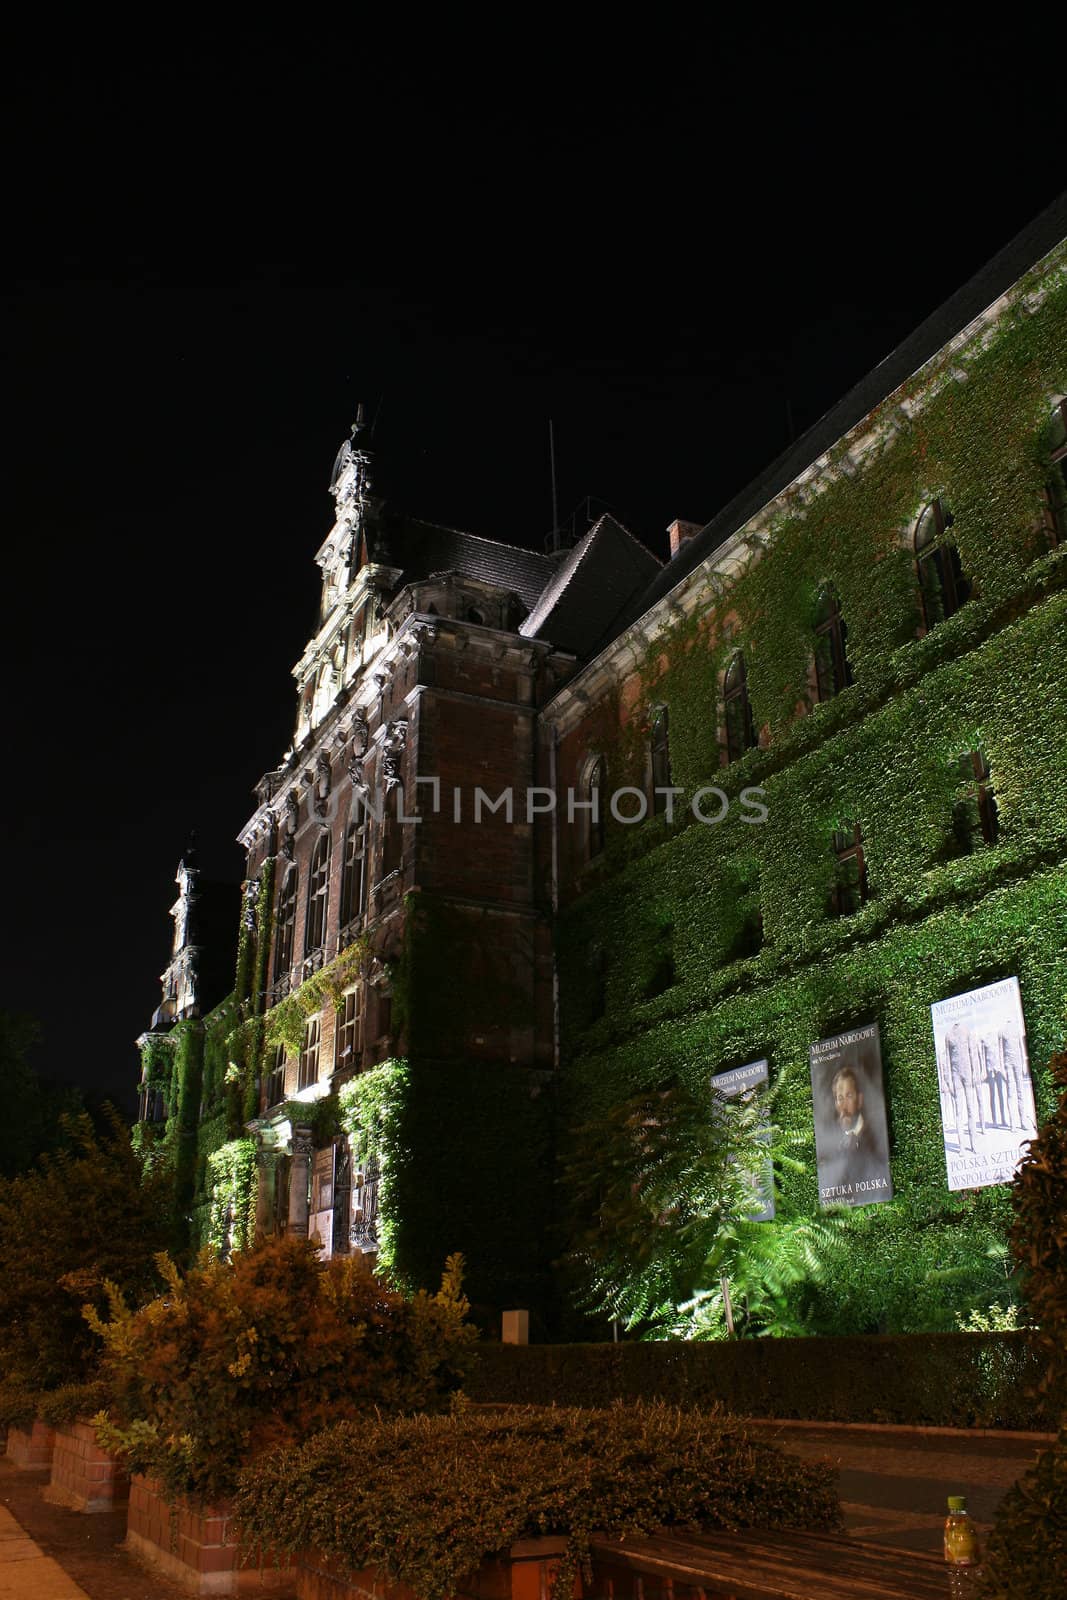 national museum, night shot, Wroclaw, Poland green ivy